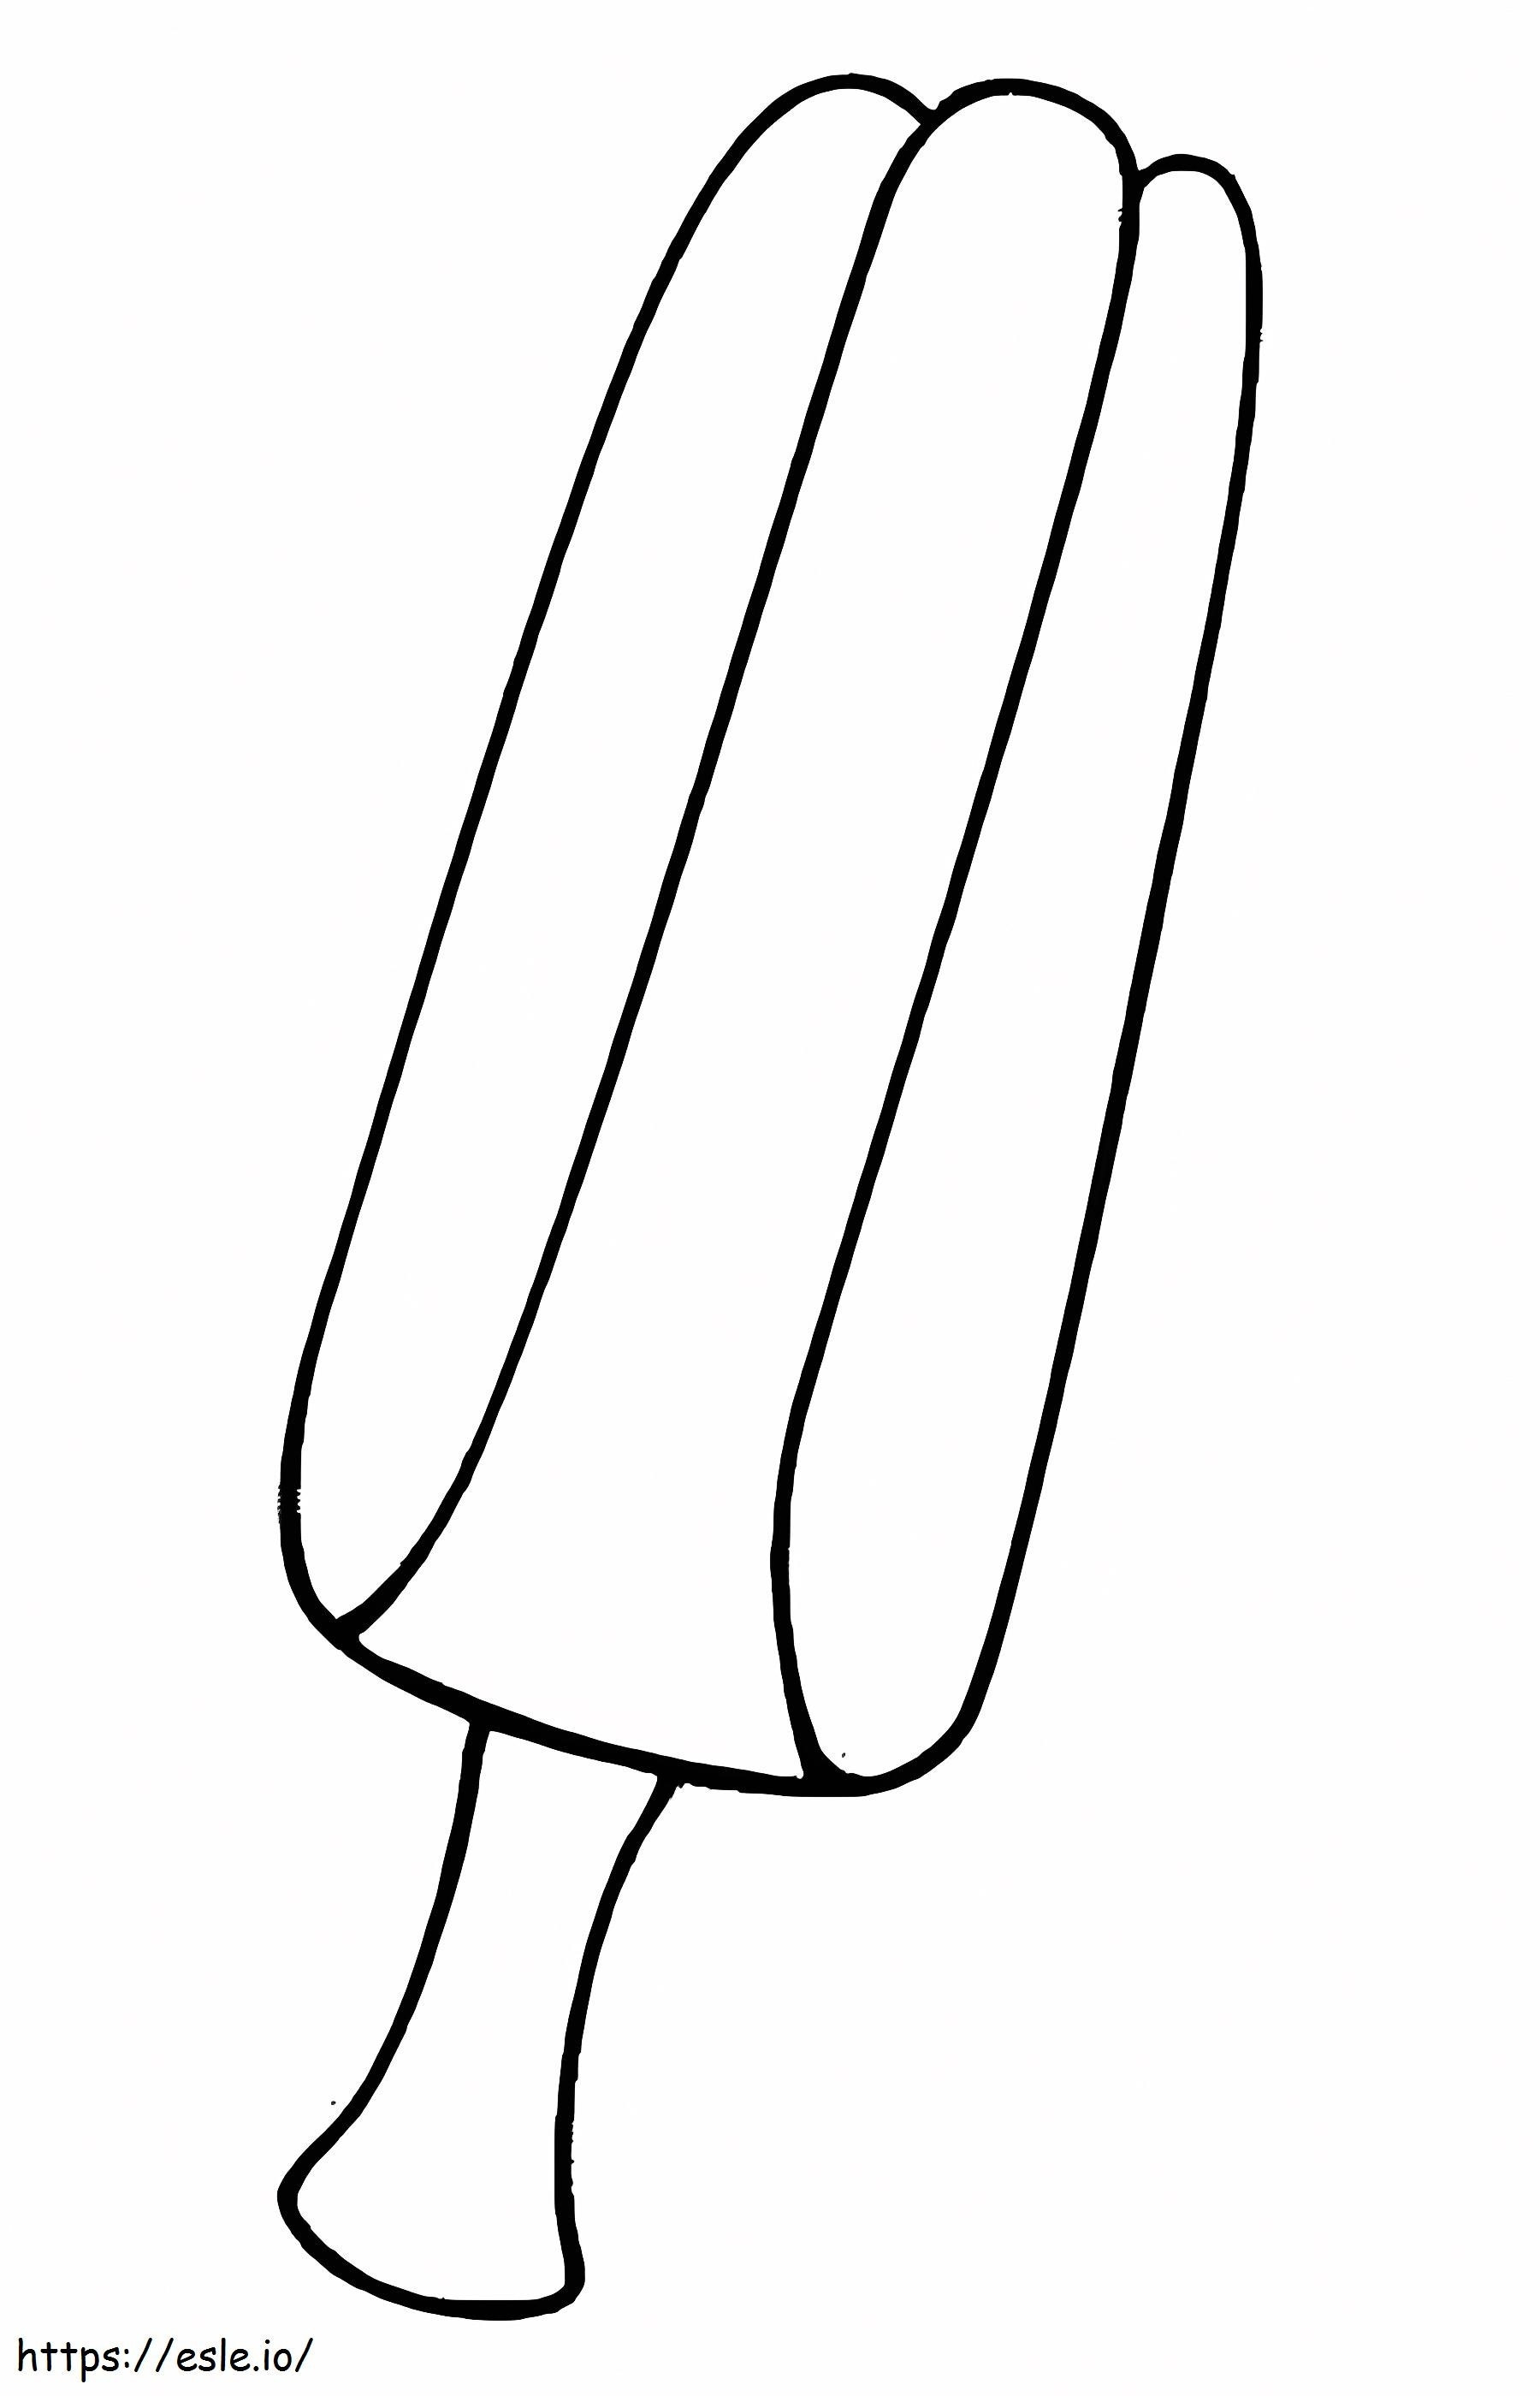 Simple Popsicle coloring page